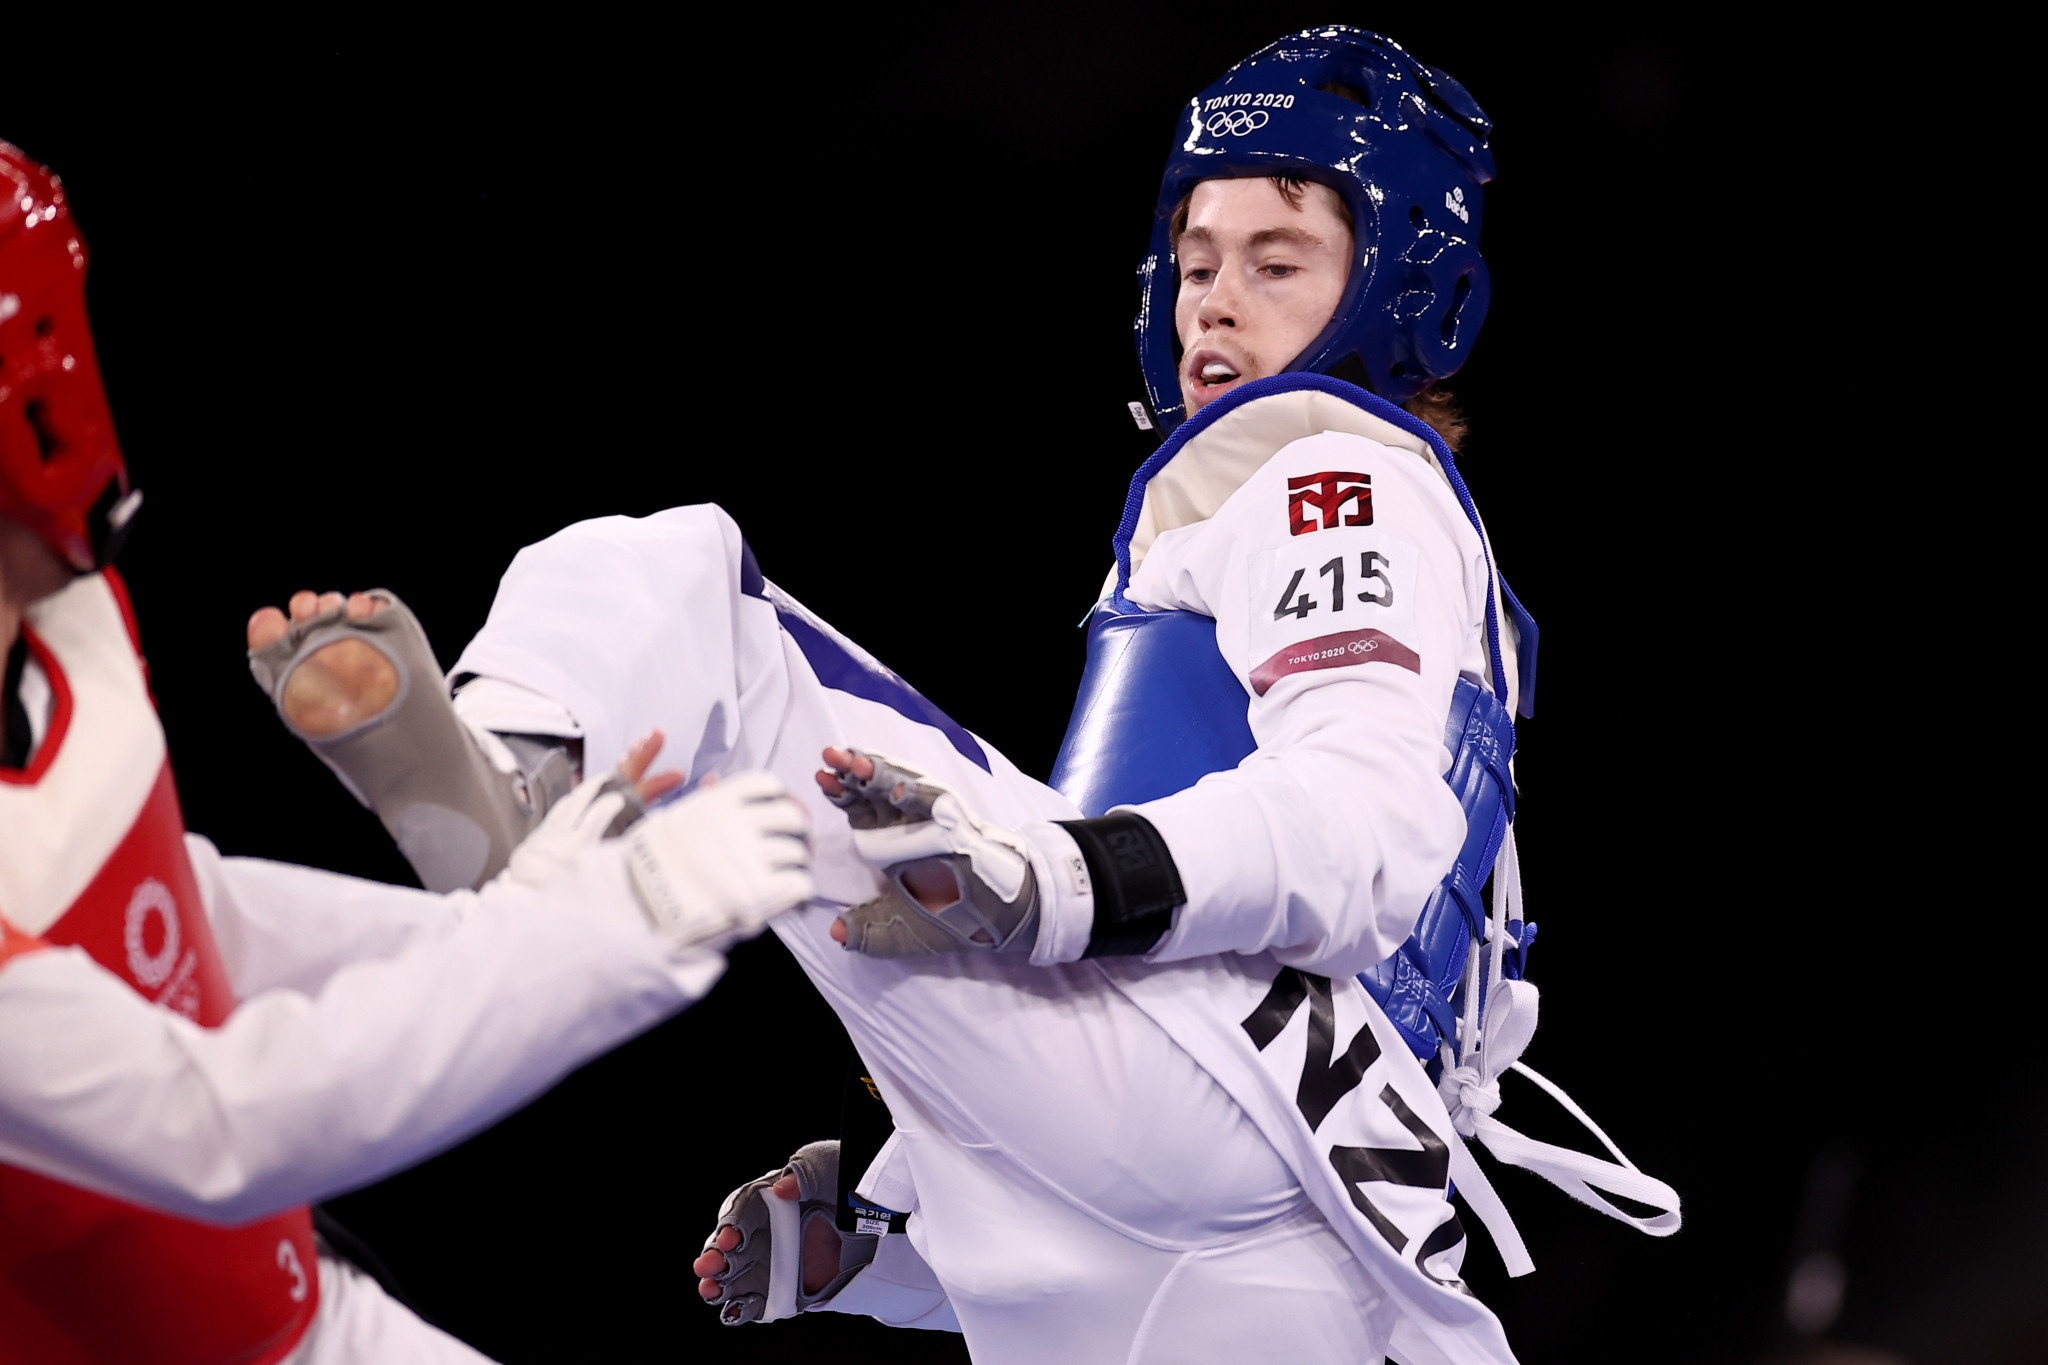 tom Burns was the only Taekwondo athlete to represent New Zealand at Tokyo 2020. GETTY IMAGES